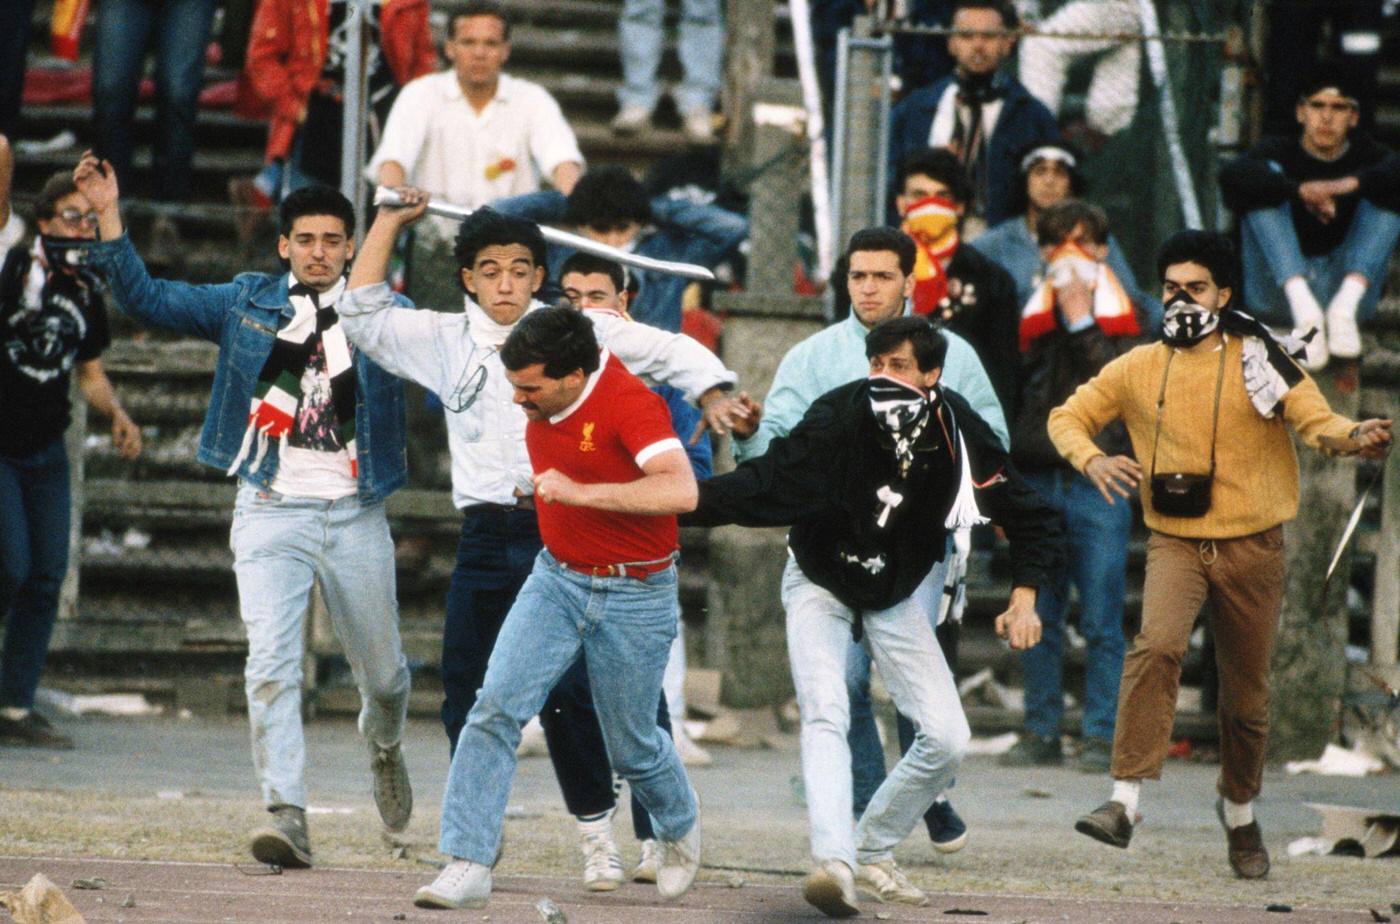 Liverpool fan chased by Juventus fans at Heysel Stadium, European Cup Final, 1985.